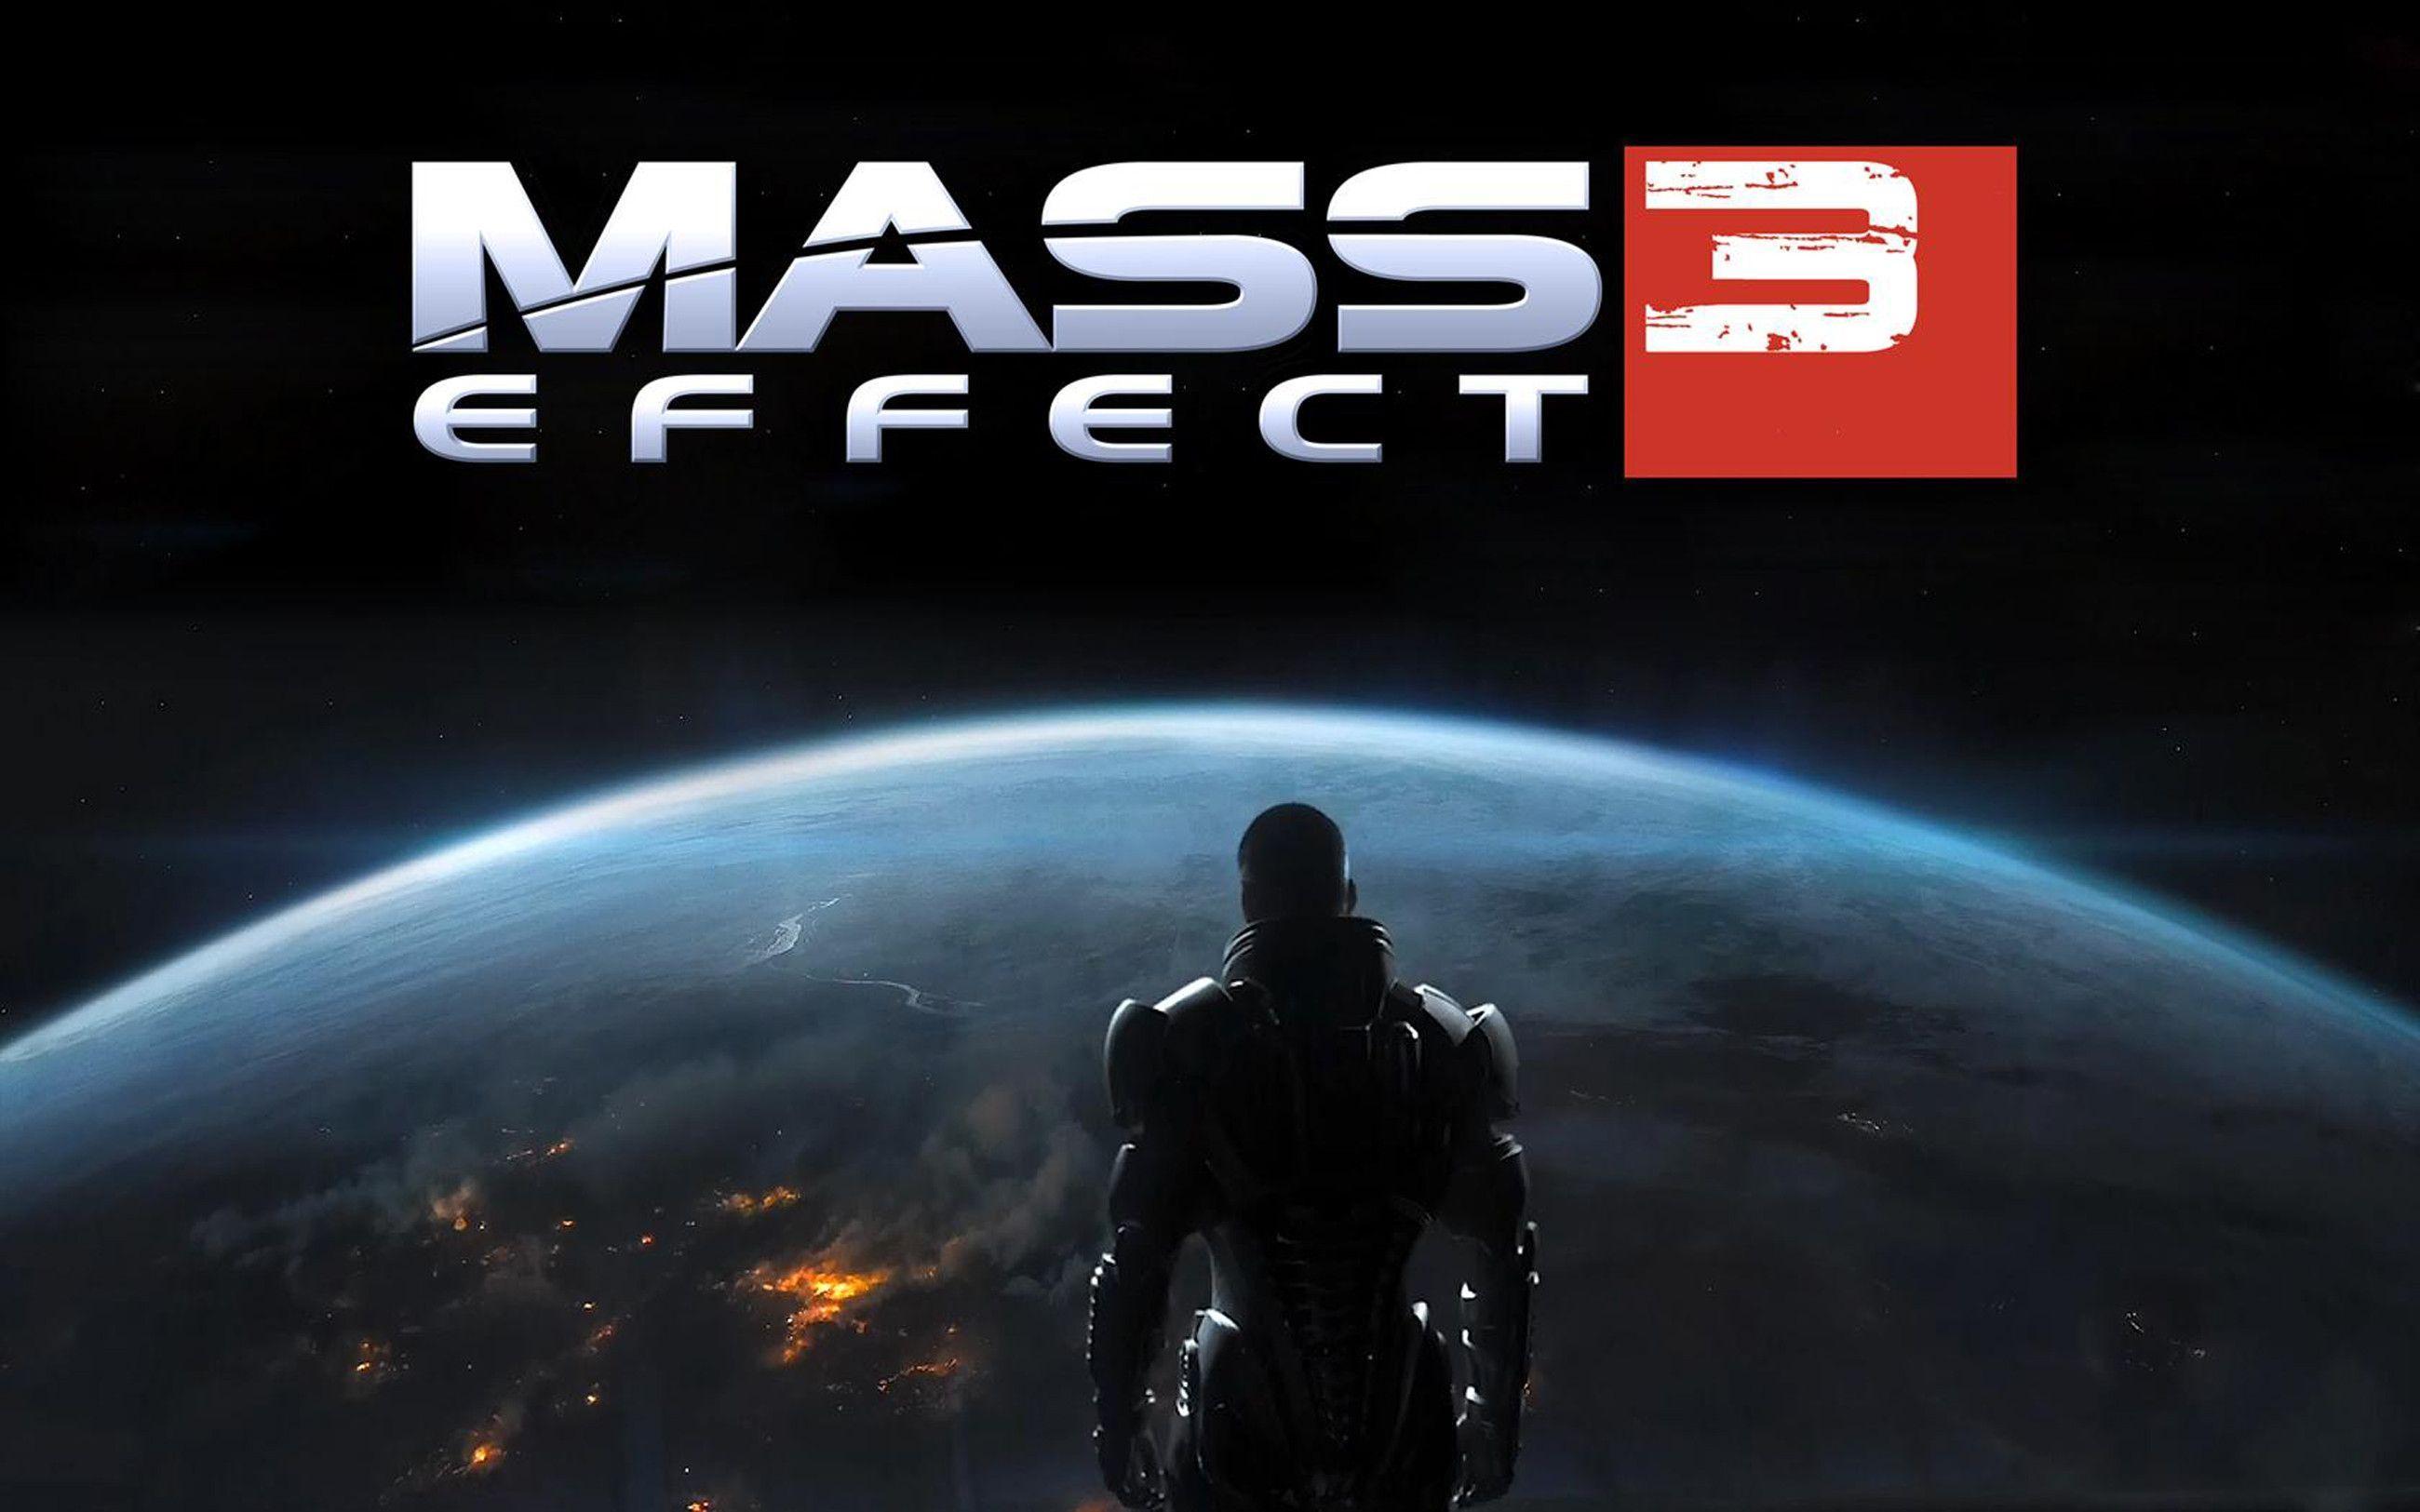 Mass Effect 3 Wallpapers Wallpaper Cave Images, Photos, Reviews